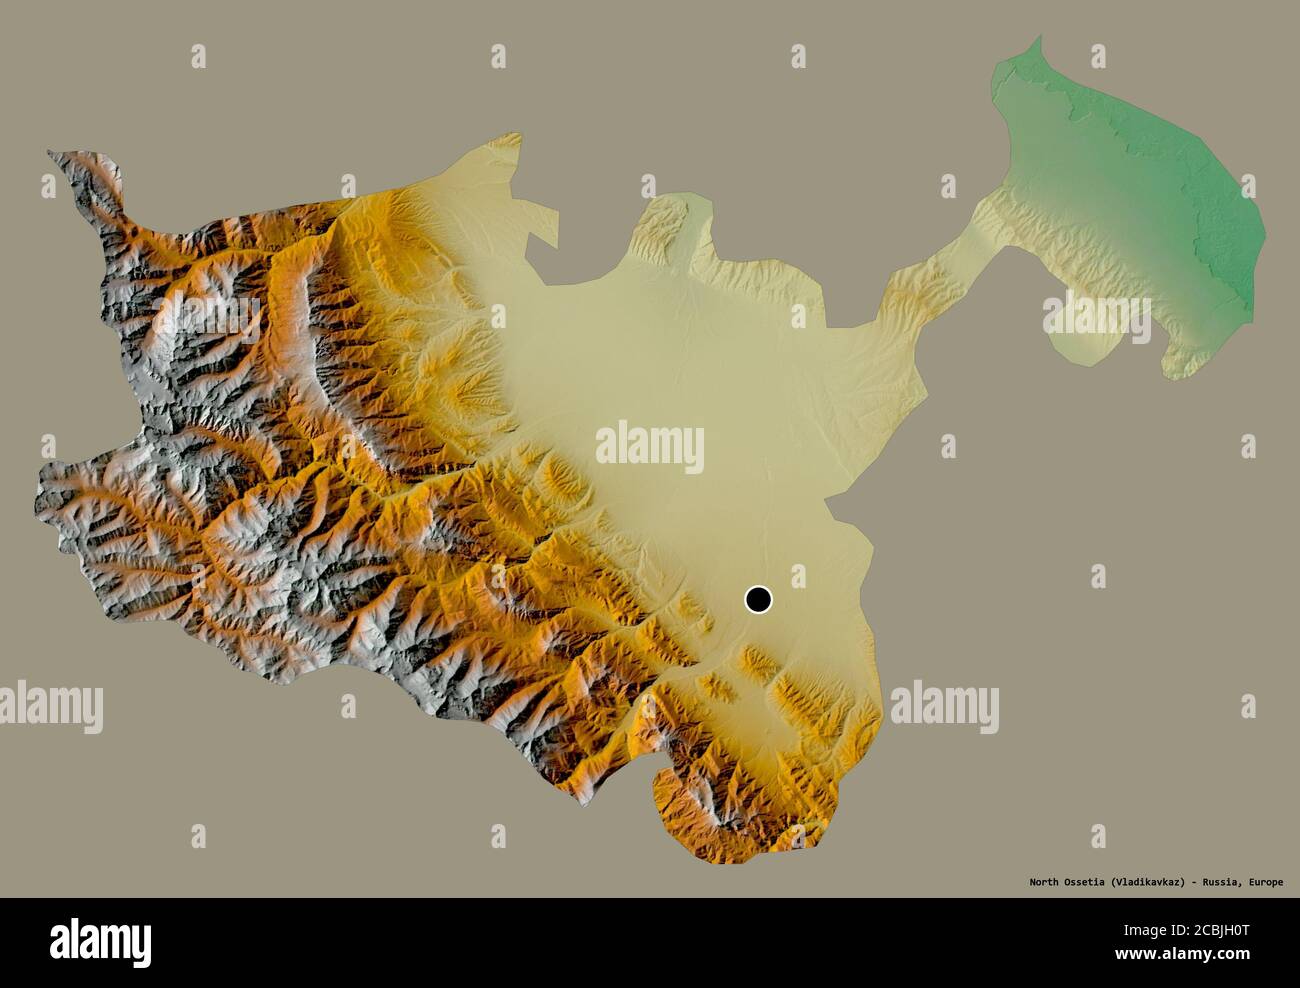 Shape of North Ossetia, republic of Russia, with its capital isolated on a solid color background. Topographic relief map. 3D rendering Stock Photo